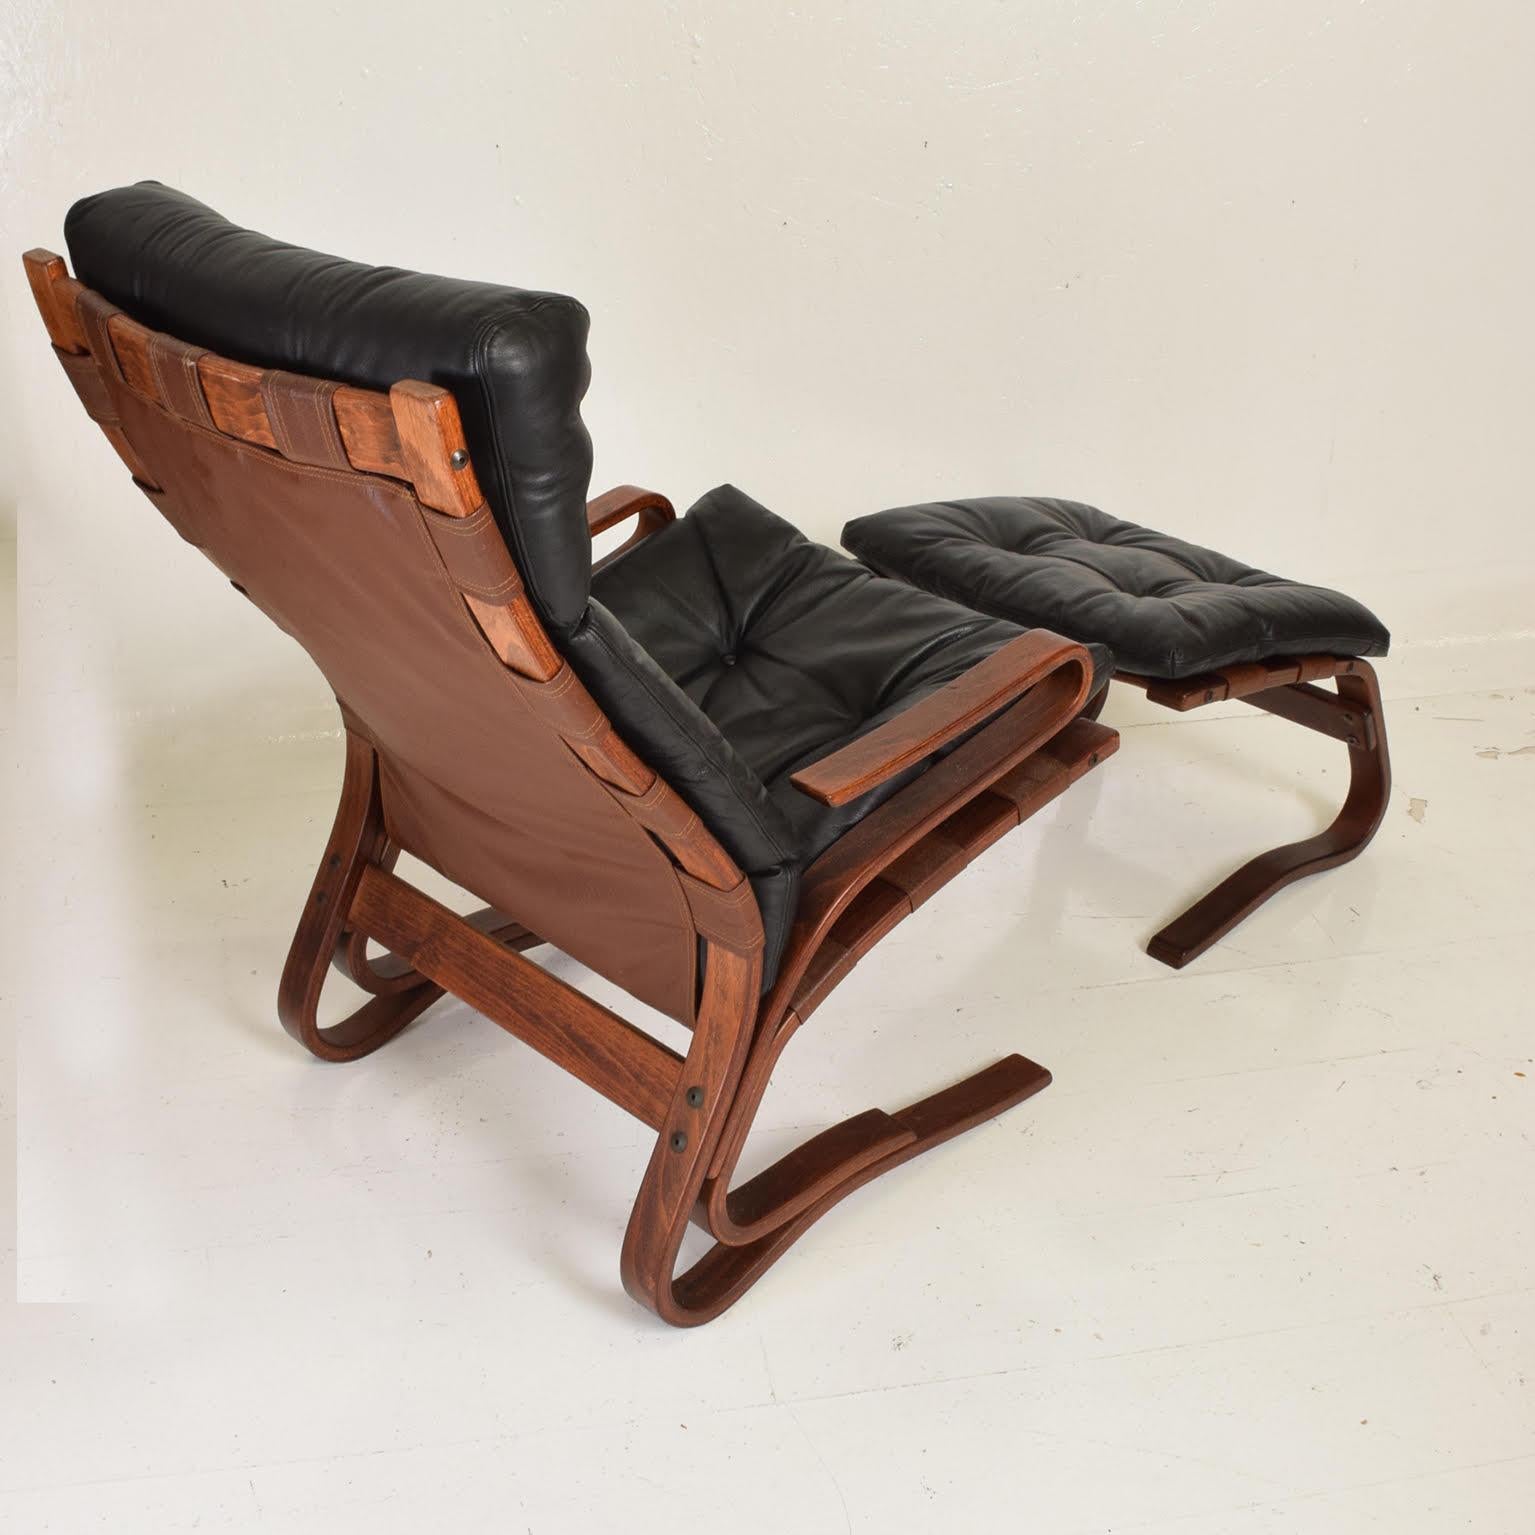 For your consideration, a lounge chair and ottoman by Ingmar Relling for Westnofa. Rare bent plywood cantilever model with matching ottoman. Bent plywood finished in rosewood color and black leather. No labels are present. 

Dimensions: Chair 40